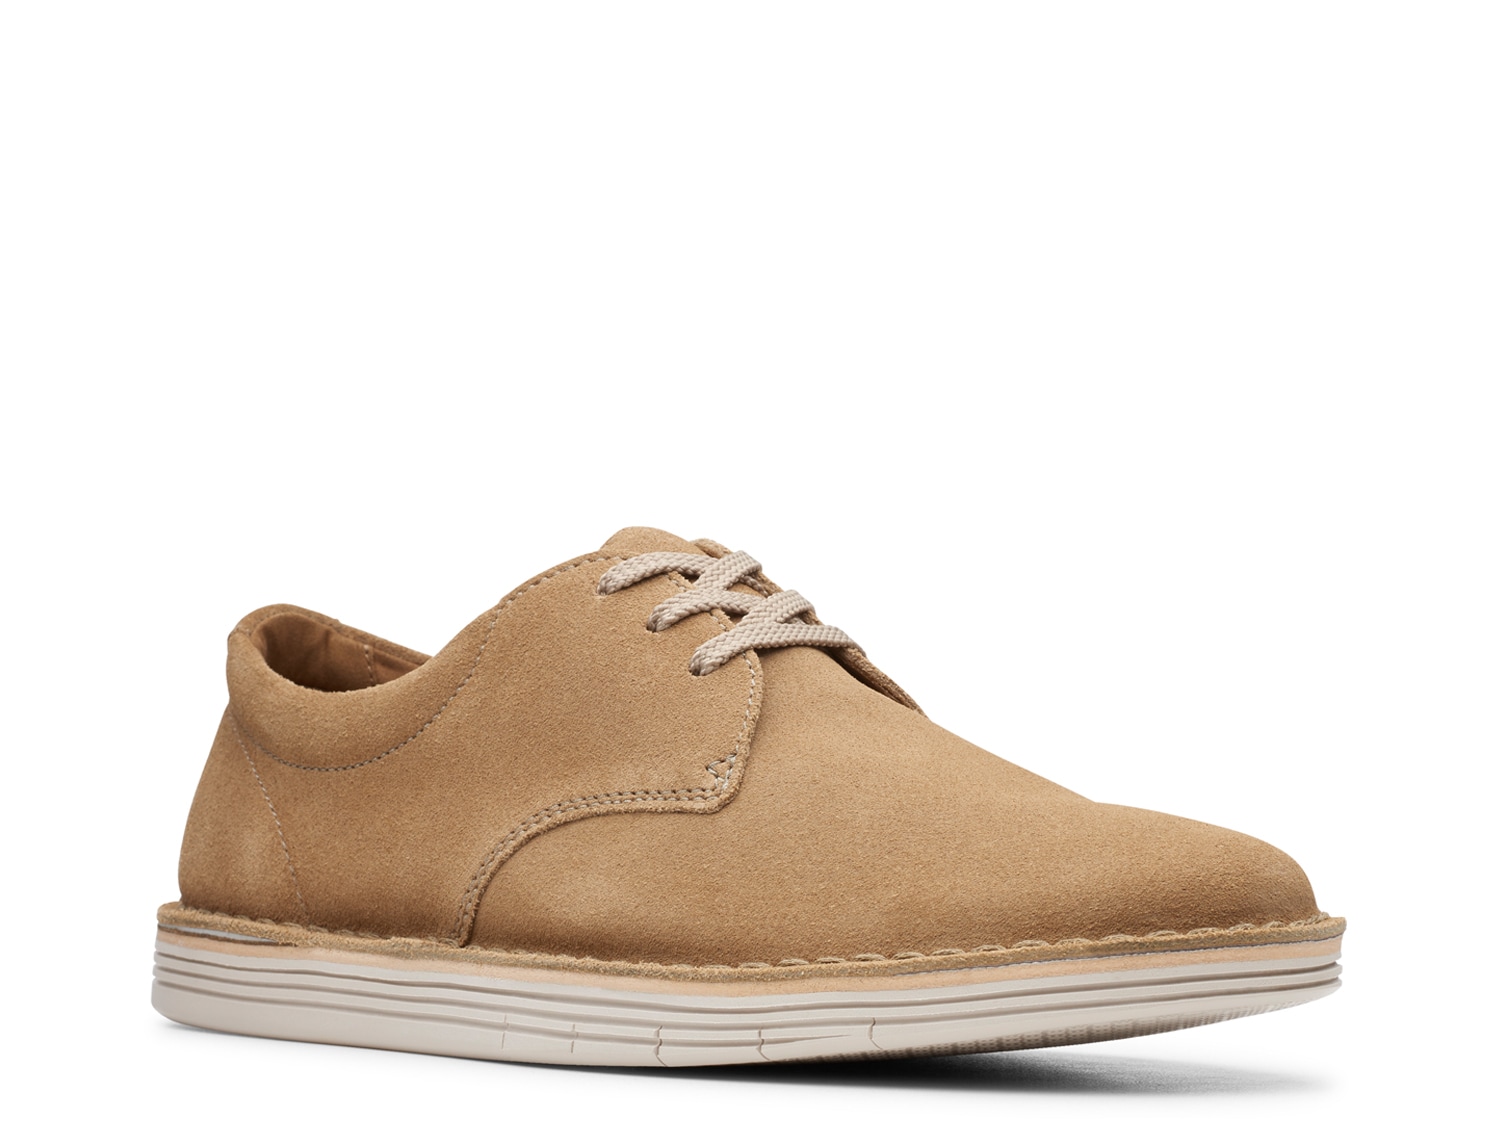 Clarks Forge Vibe Sneaker Men's Shoes | DSW